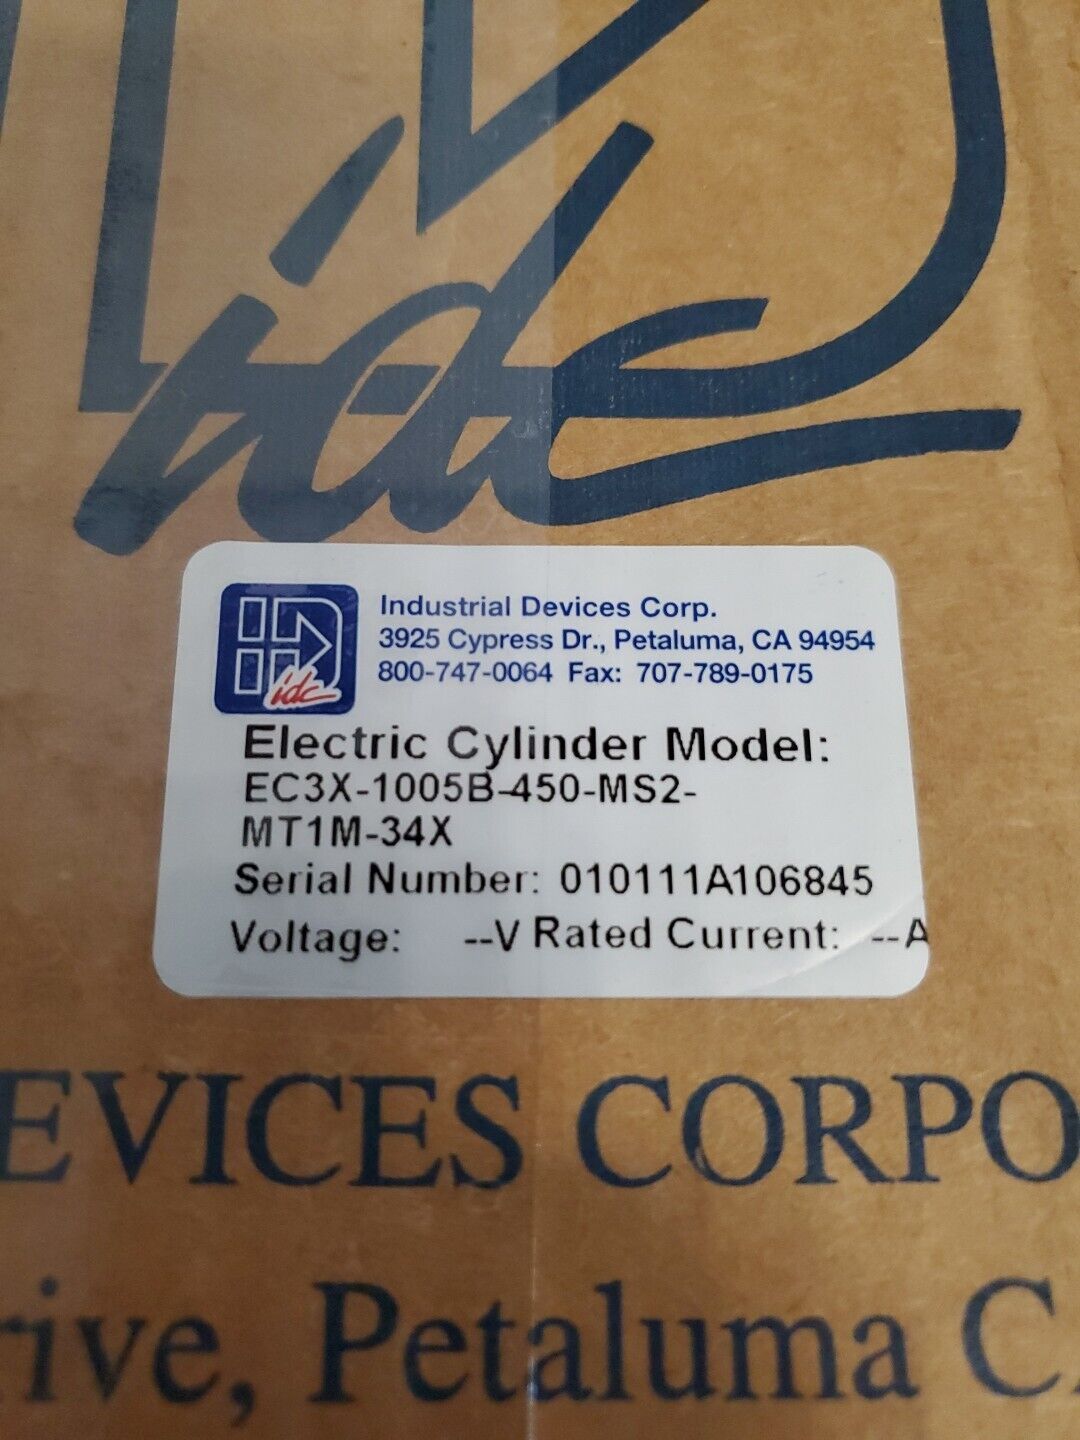 Industrial Devices Corp. EC3X-1005B-450-MS2-MT1M-34X Electric Cylinder.    4F-27